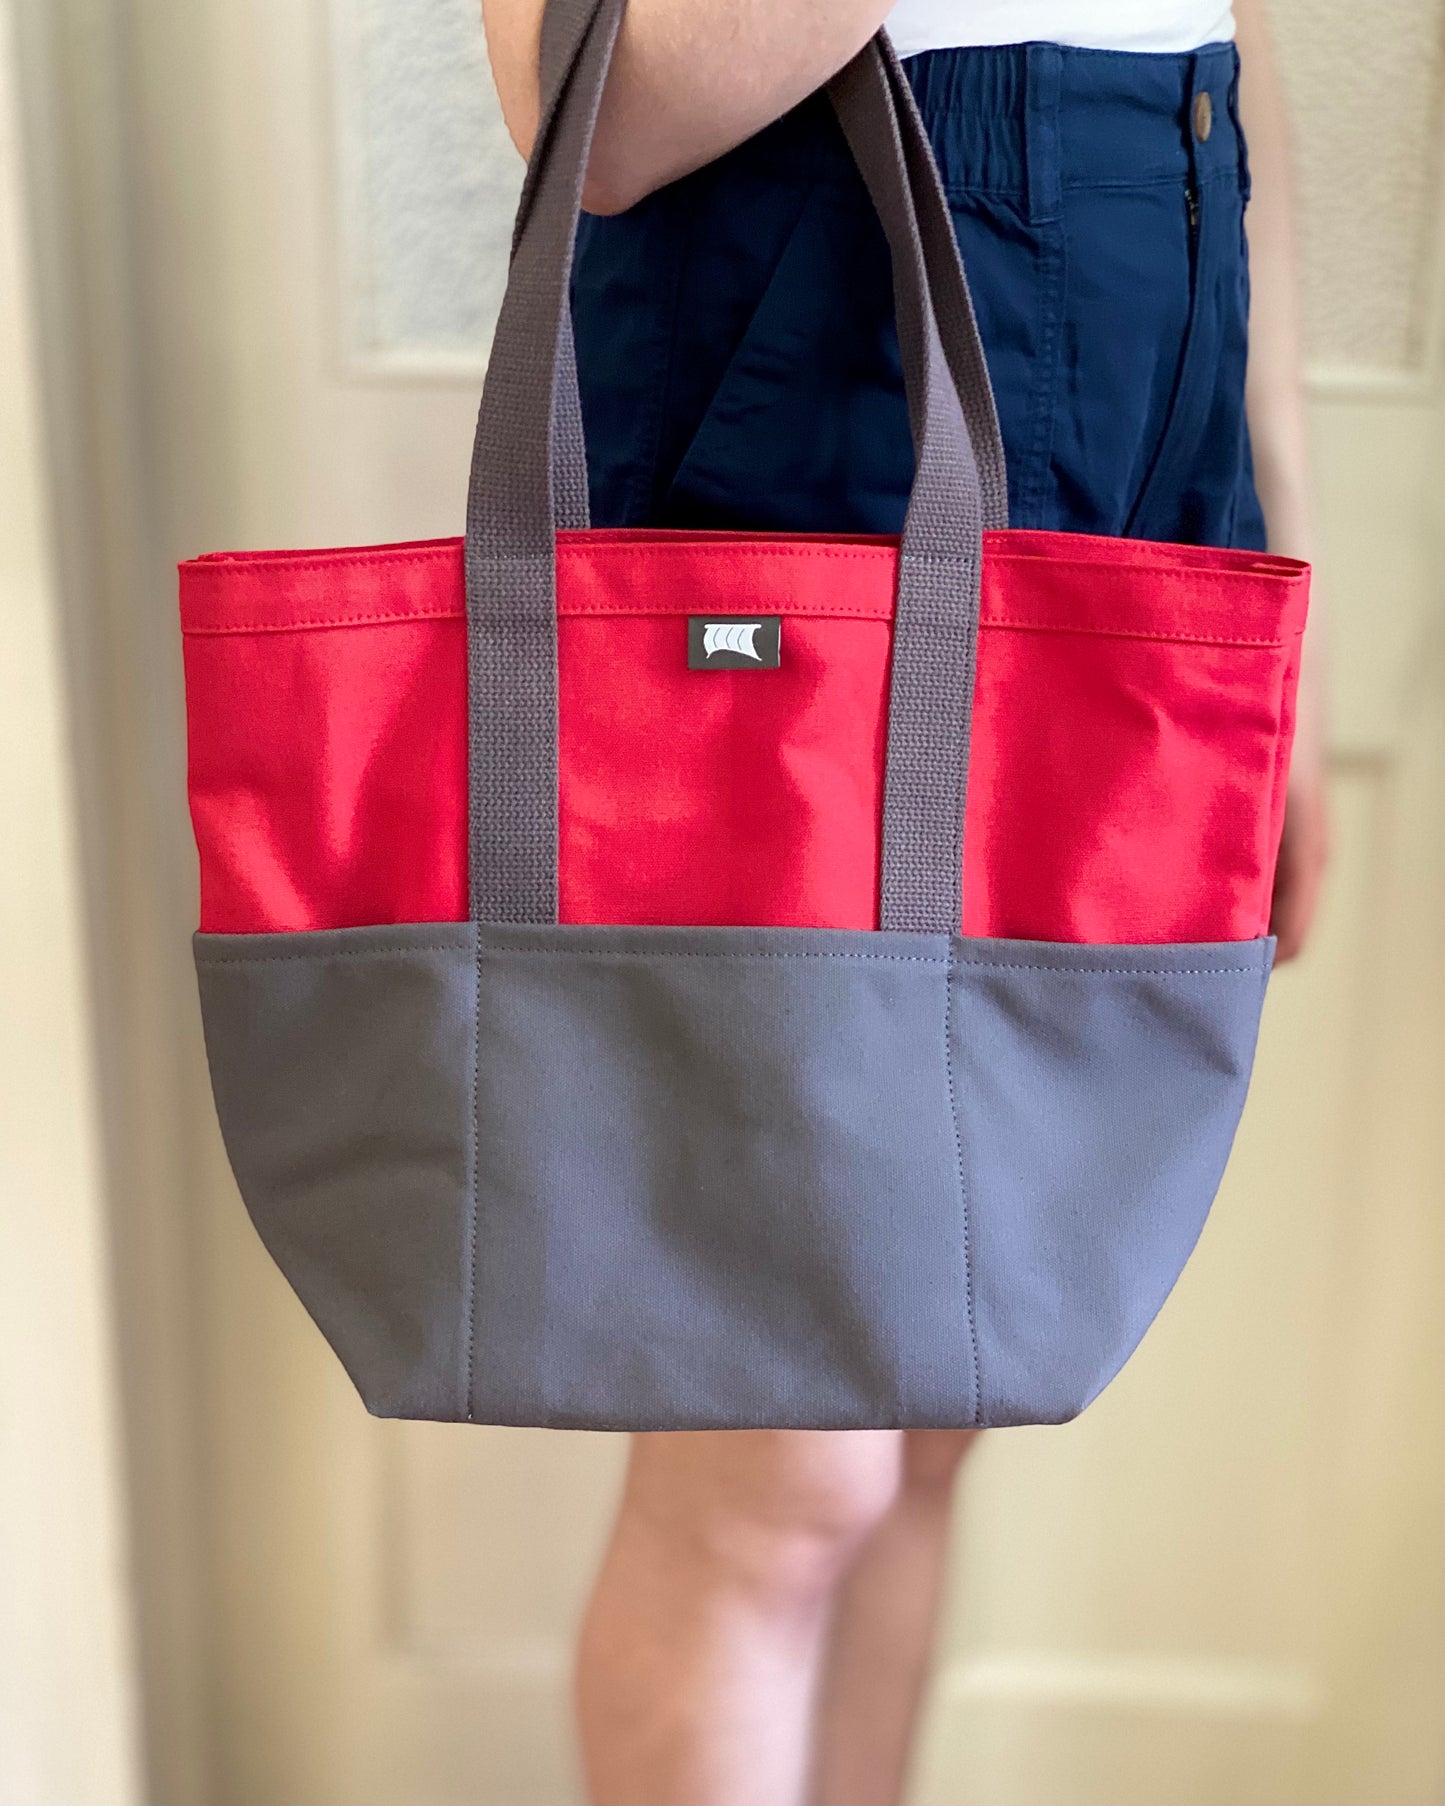 “The Galley” Bag by Topsail Canvas